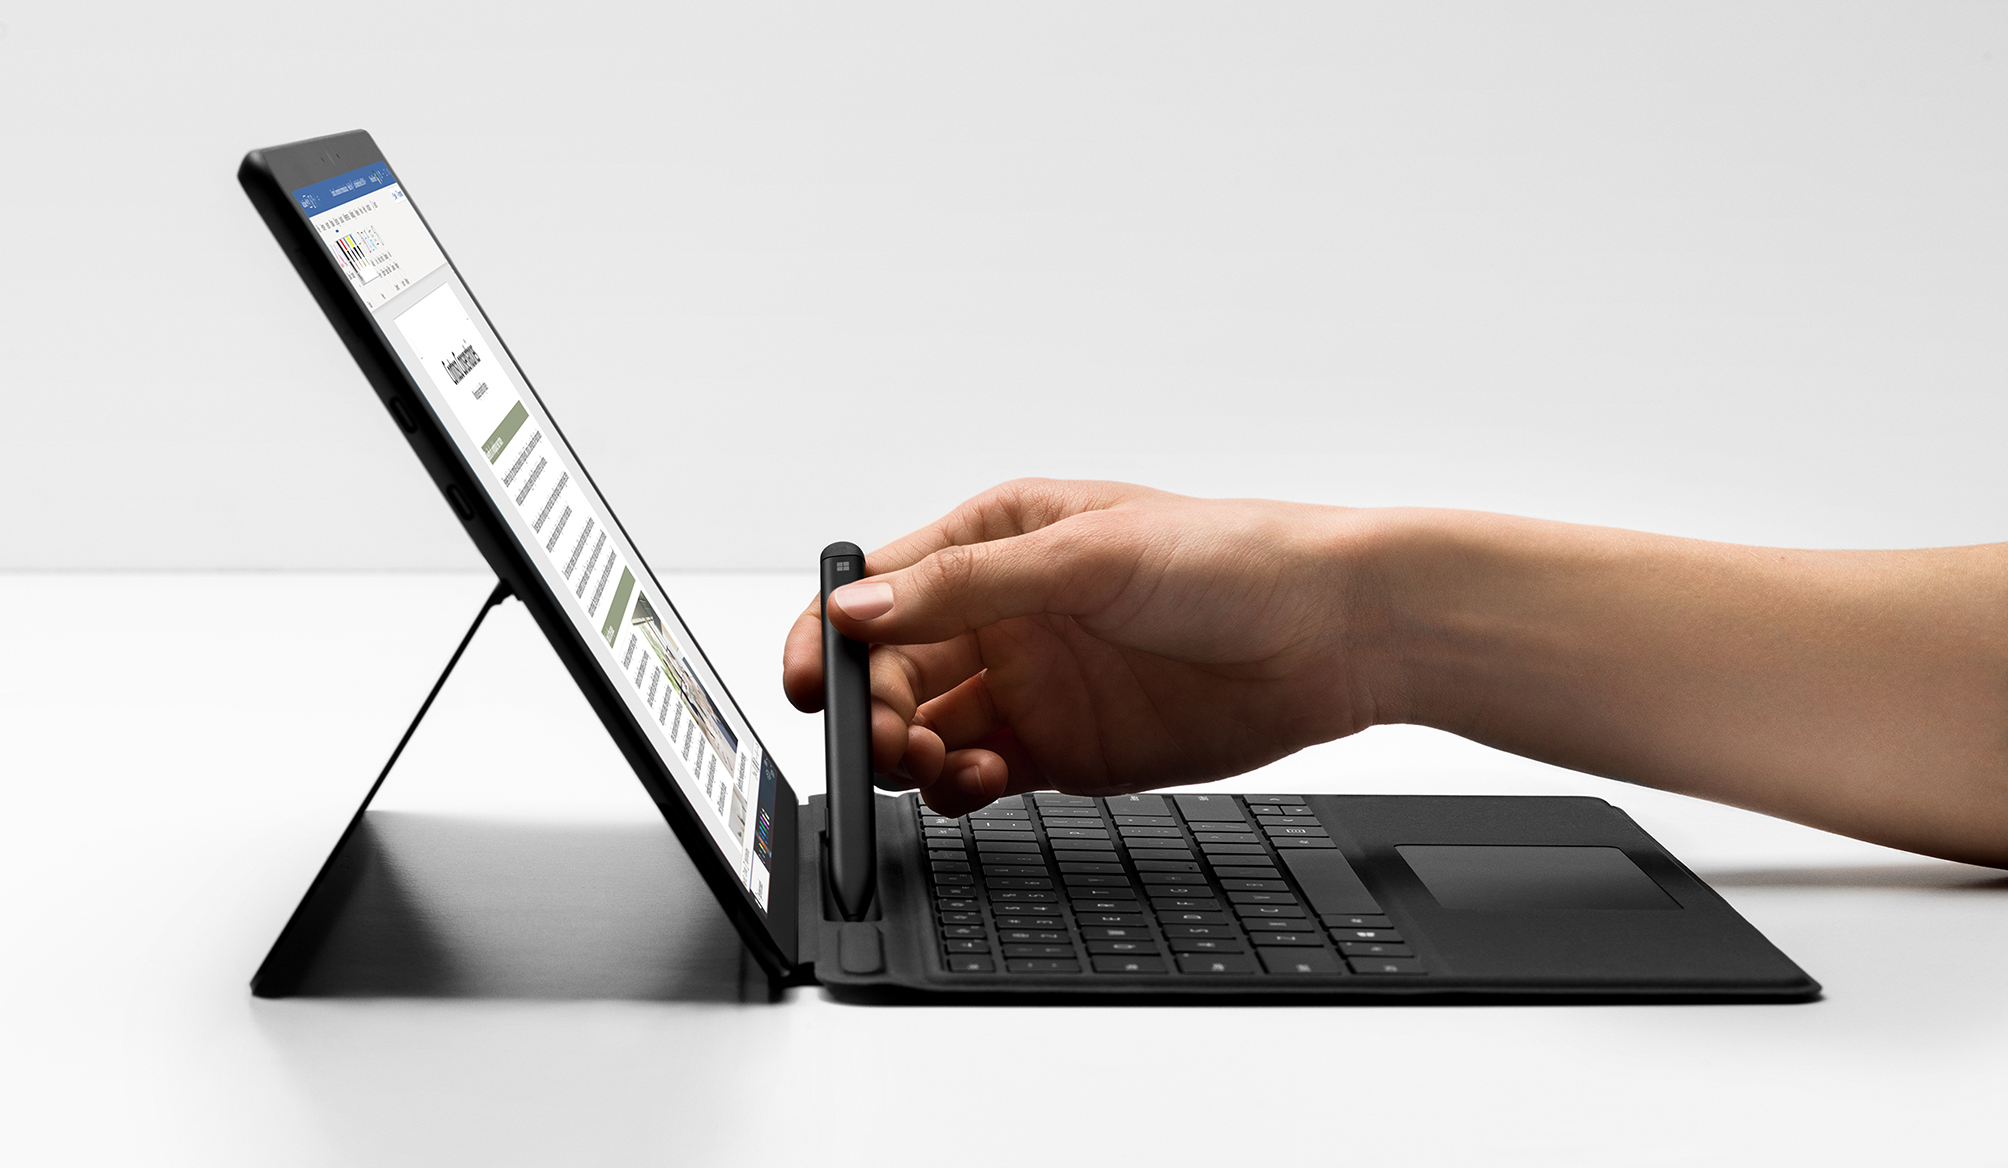 Image of a hand removing a pen from the new Surface Pro X.